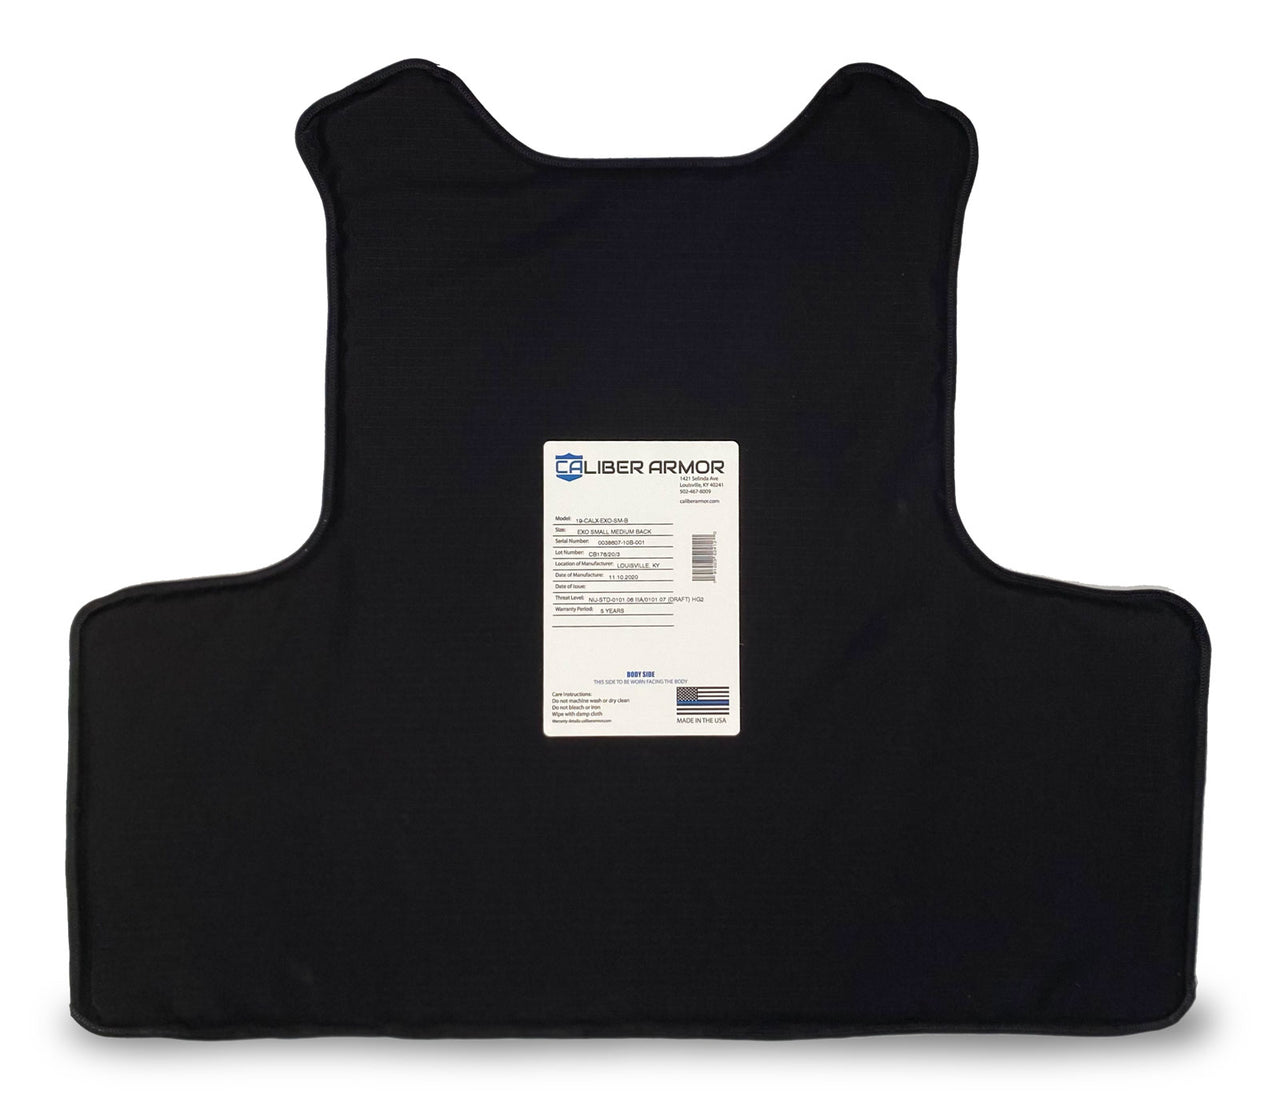 The back of a black vest with Caliber Armor label on it.